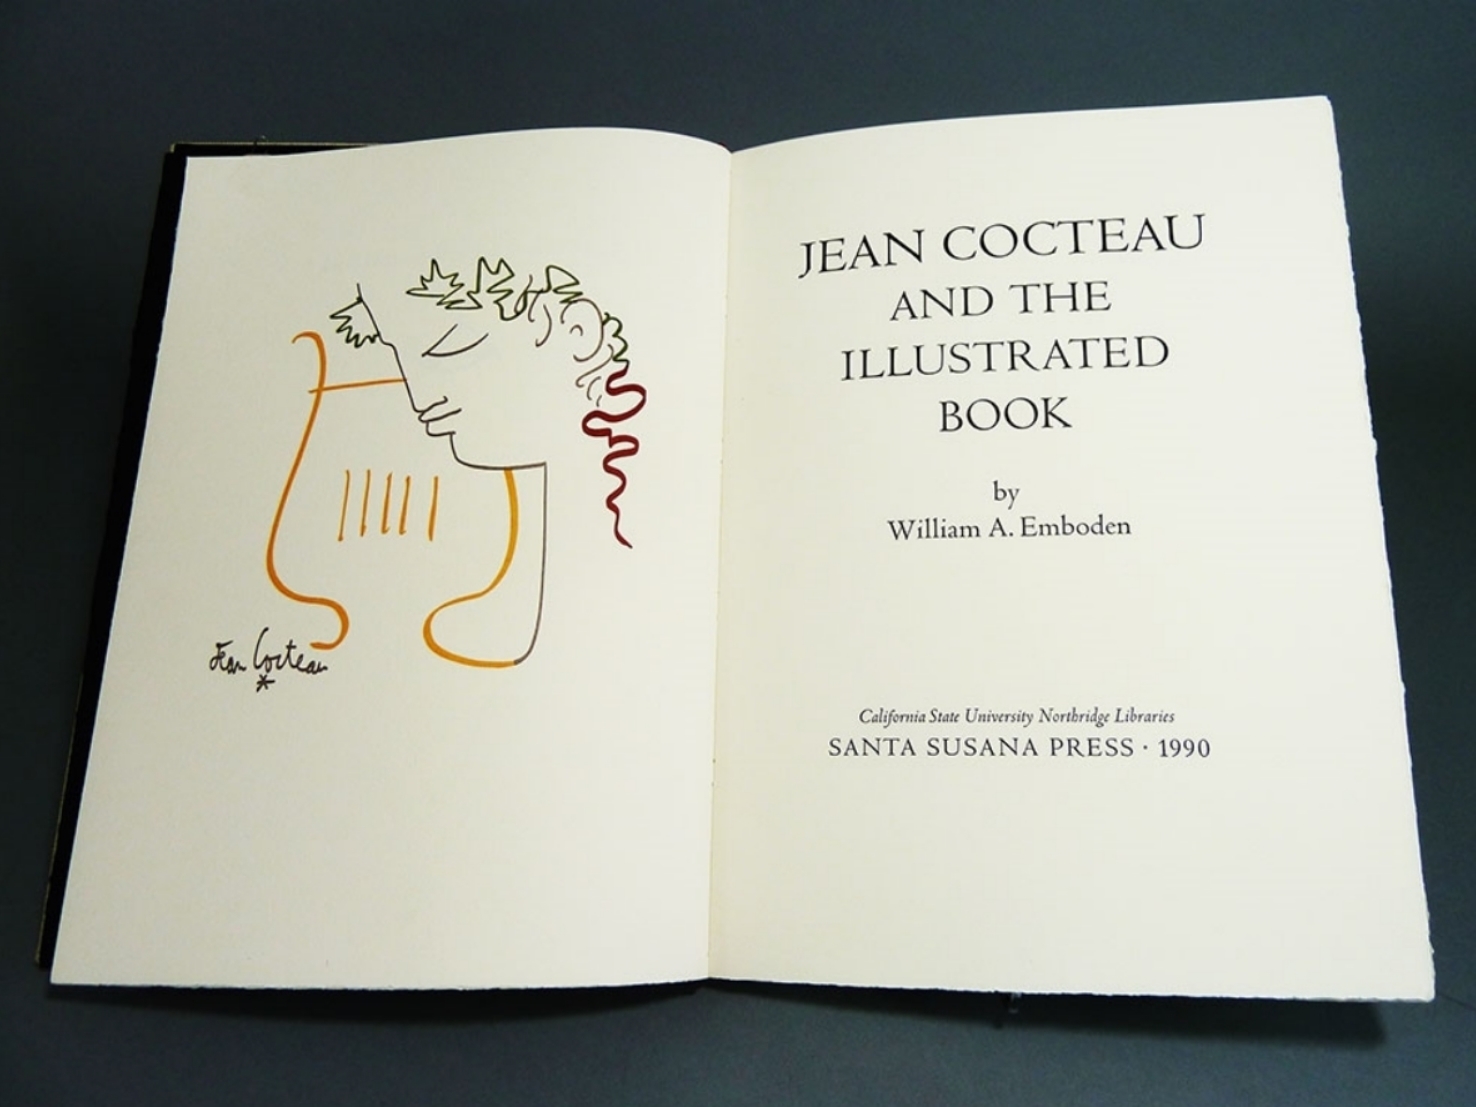 Jean Cocteau and the Illustrated Book